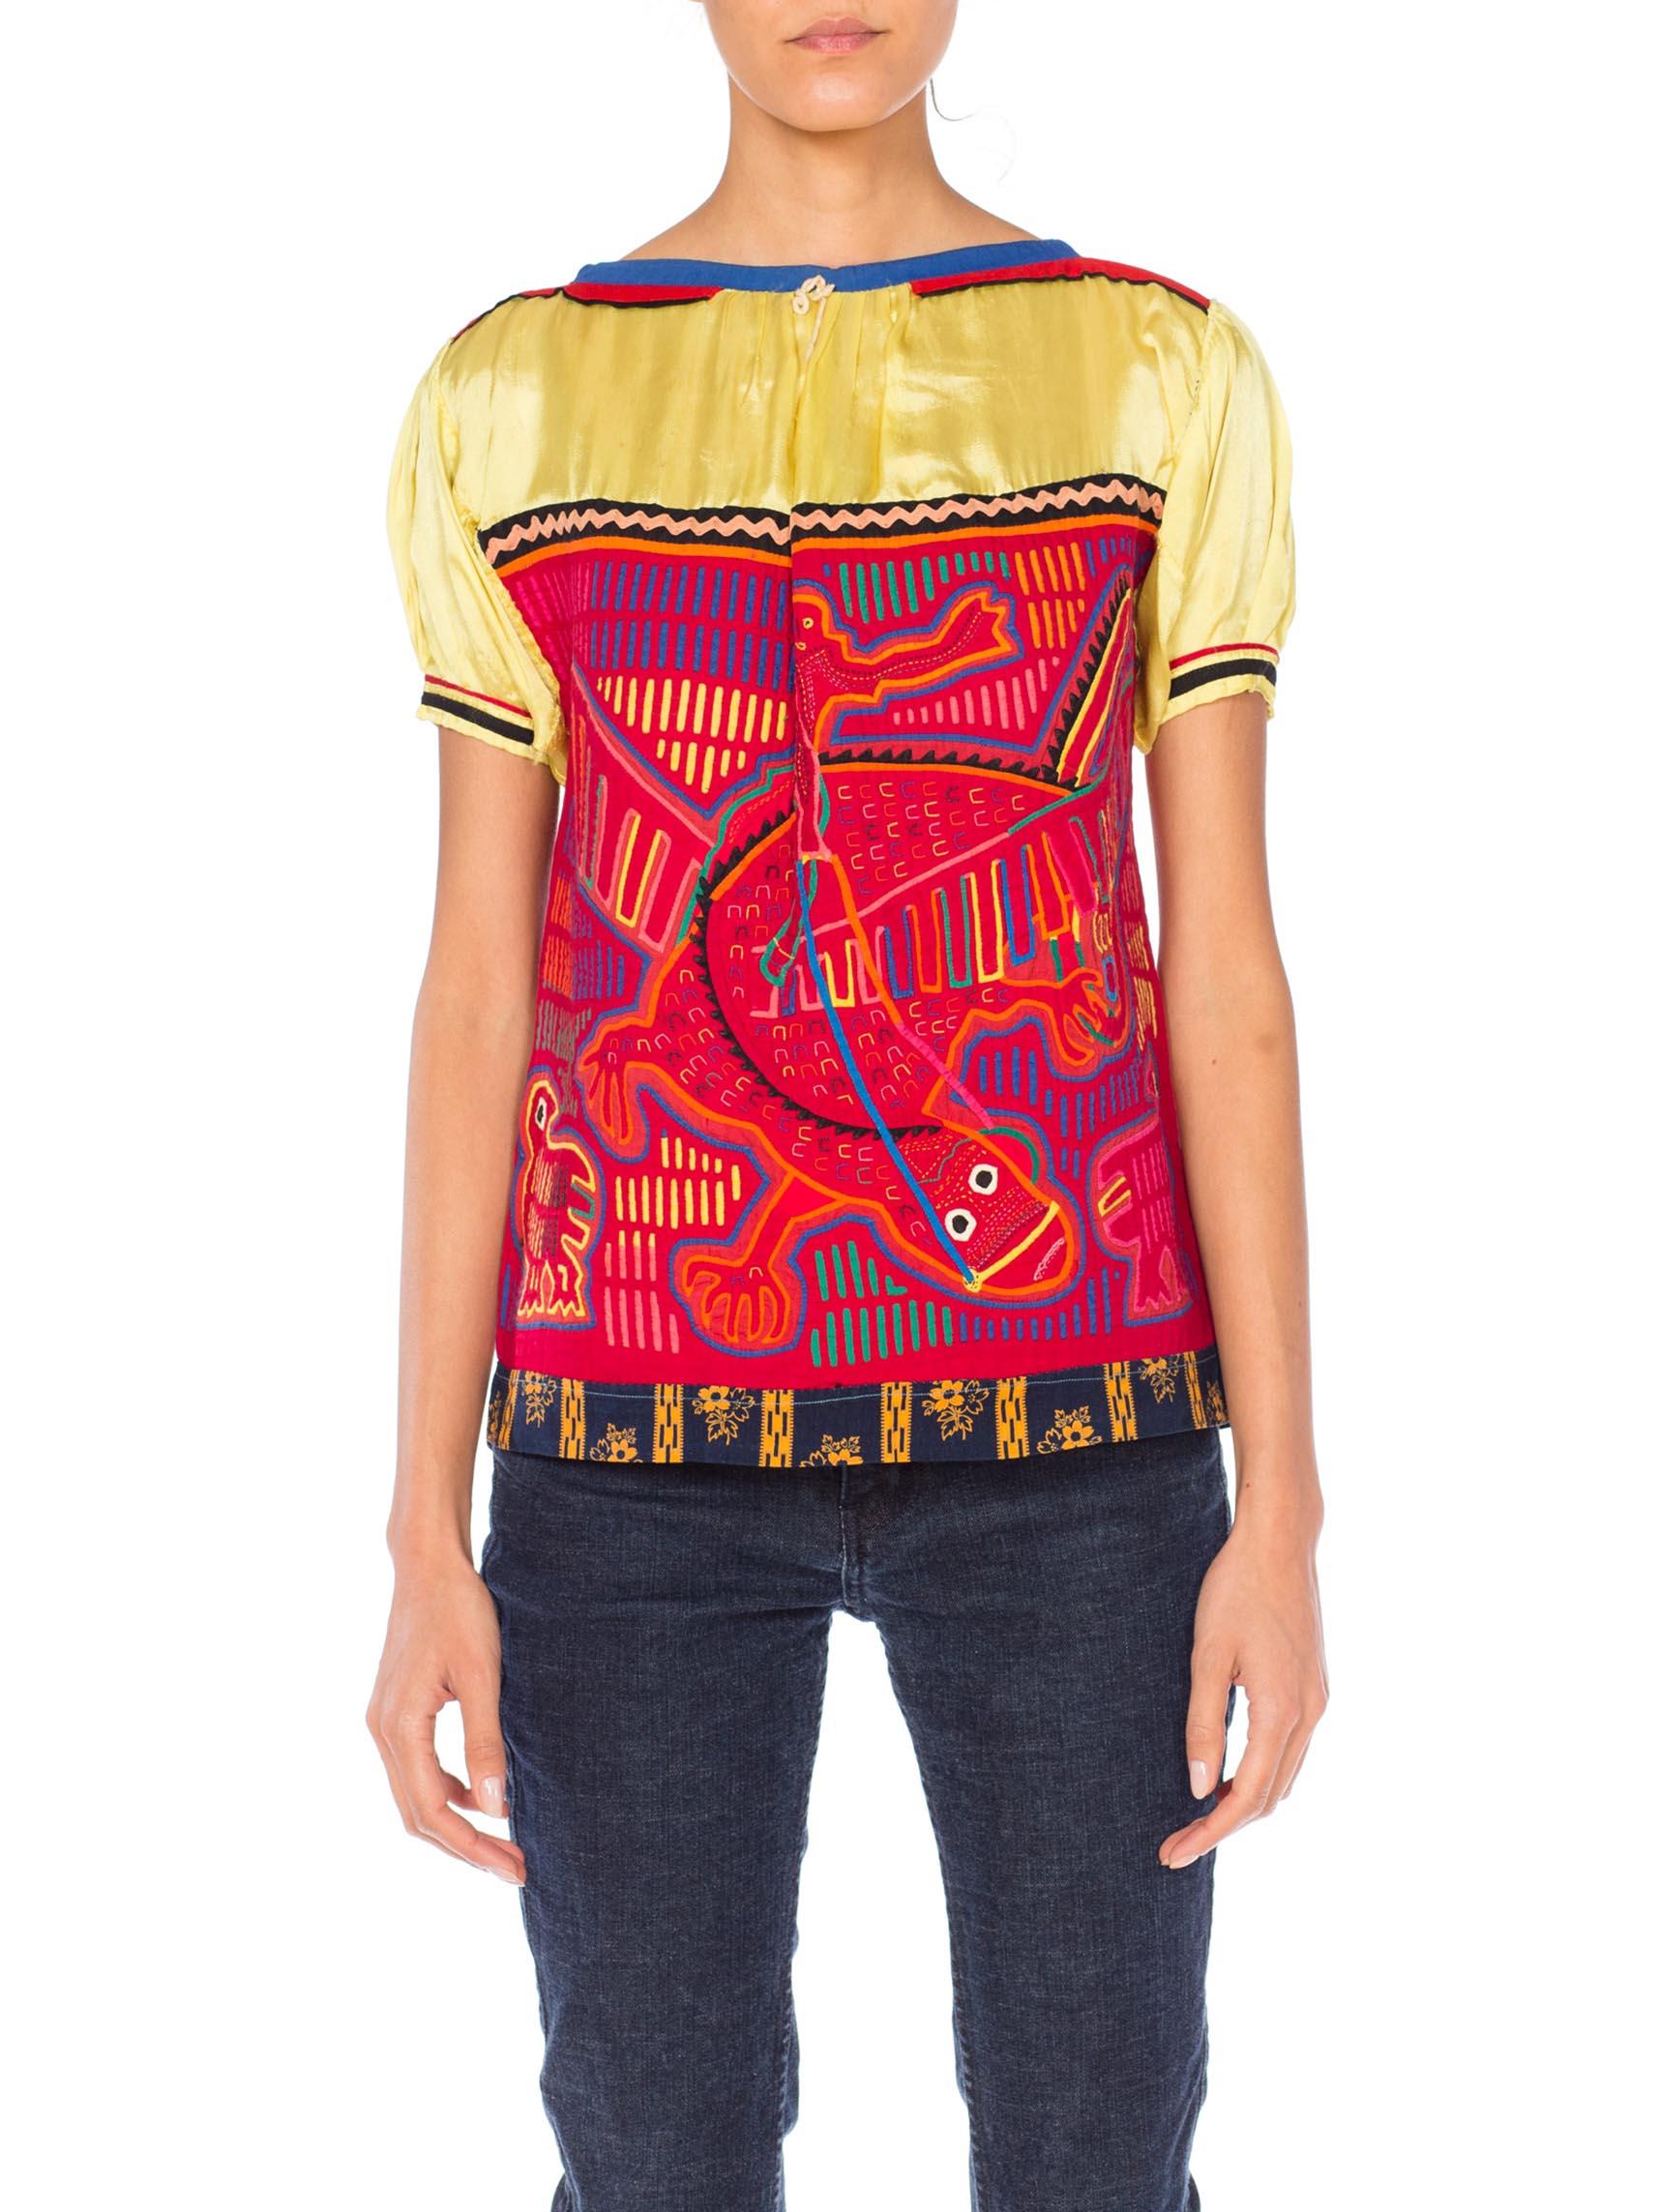 1960S Red & Yellow Cotton South American Top Appliquéd With Lizard And Birds In Excellent Condition For Sale In New York, NY